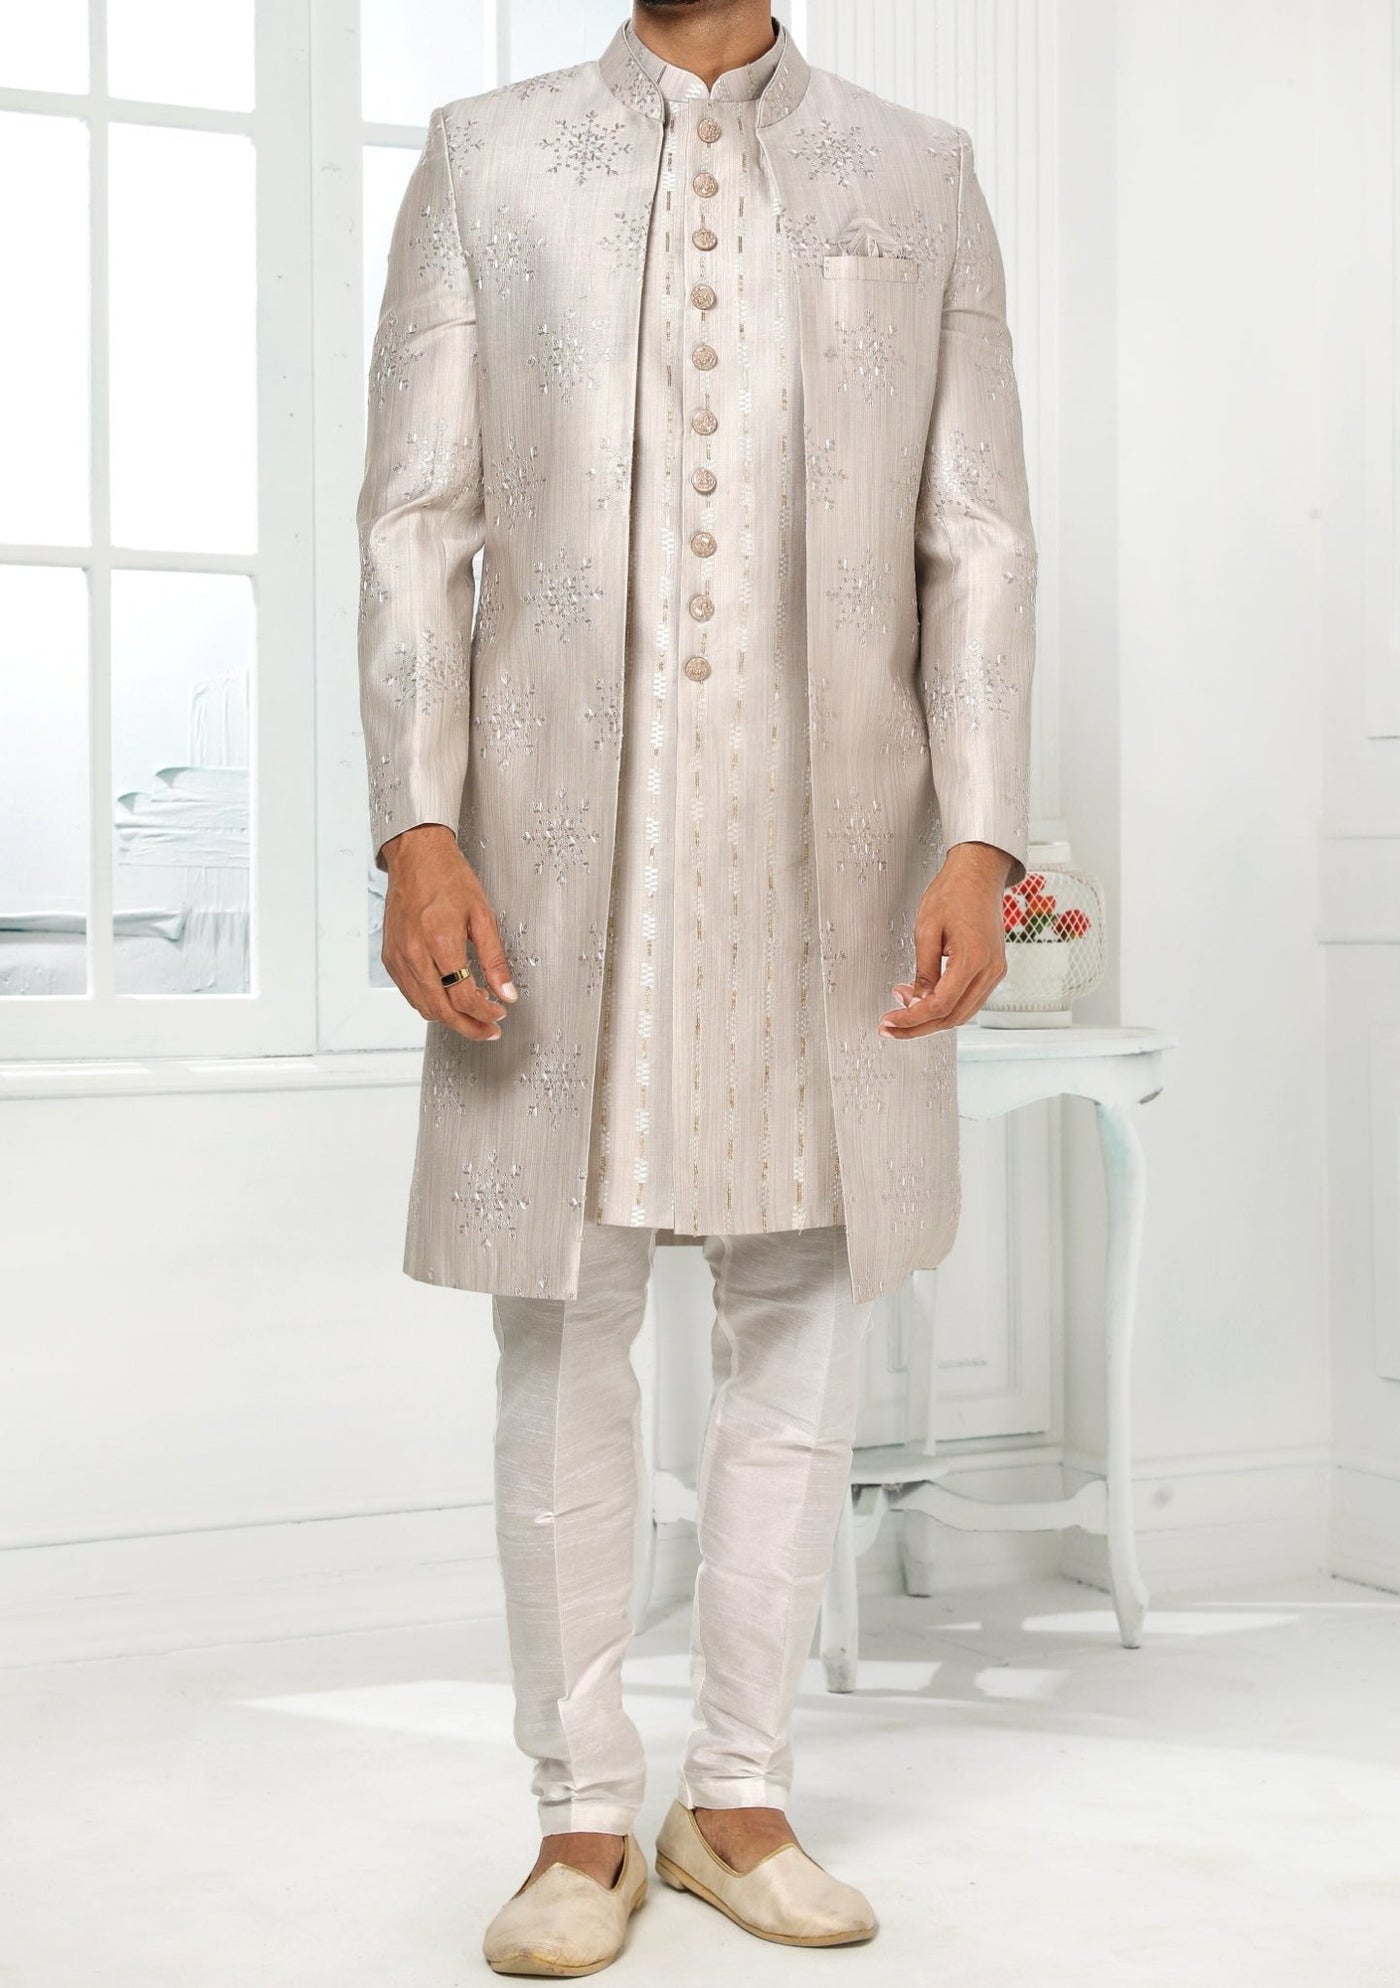 Men's Indo Western Party Wear Sherwani Suit With Jacket - db20435